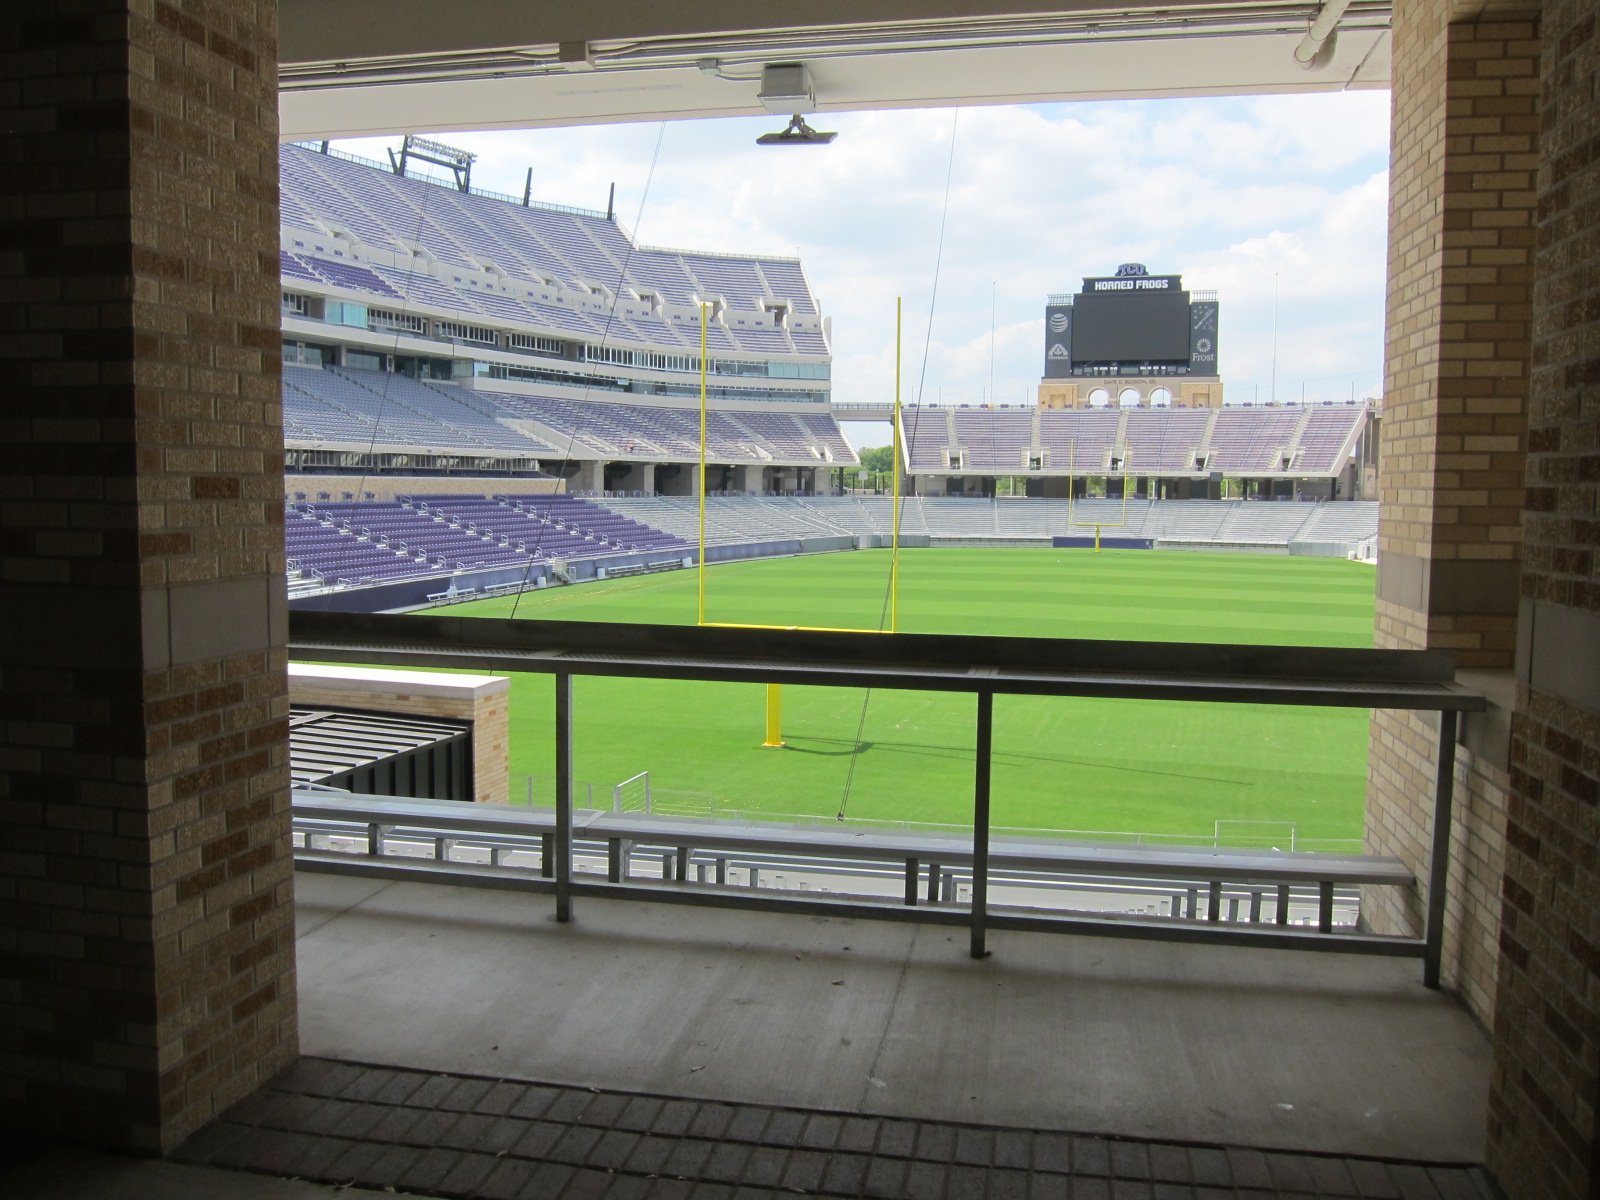 South endzone standing room area at Amon Carter Stadium